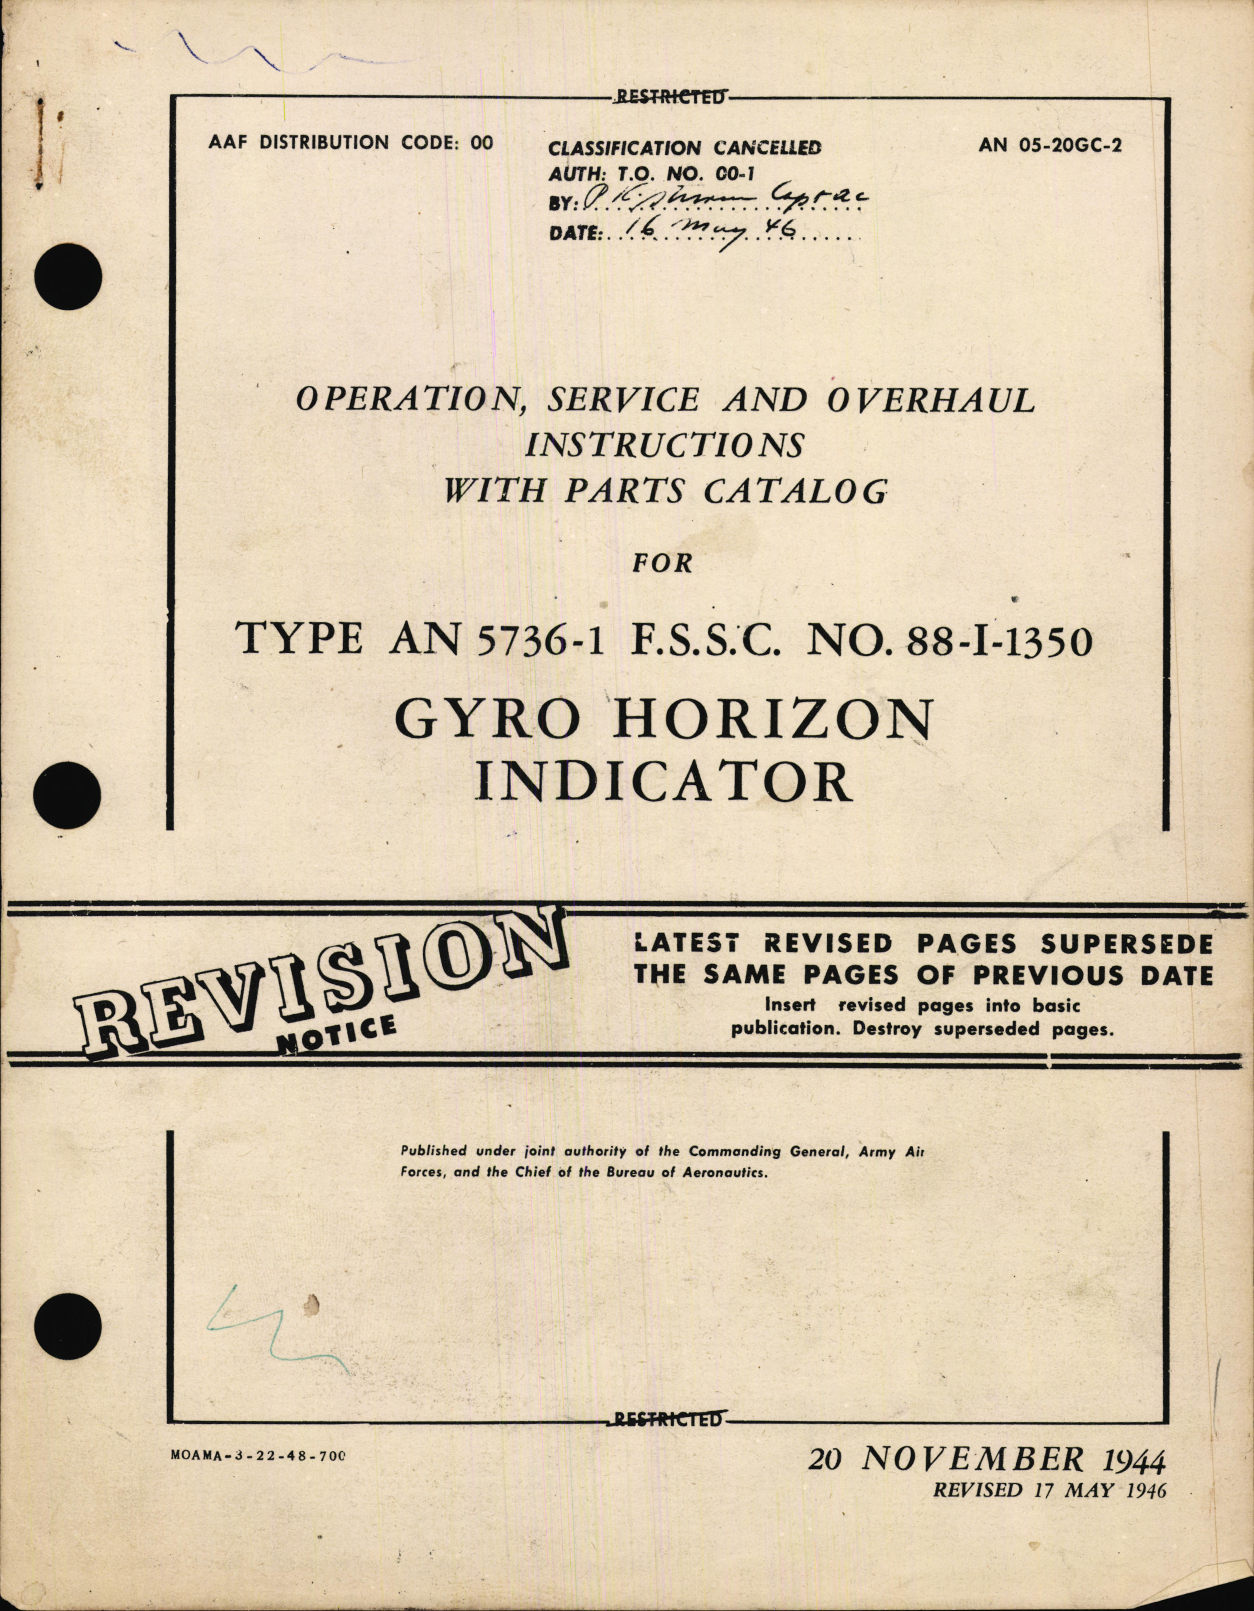 Sample page 1 from AirCorps Library document: Operation, Service, & Overhaul Instructions with Parts Catalog for Type AN 5736-1 F.S.S.C. 88-I-1350 Gyro Horizon Indicator